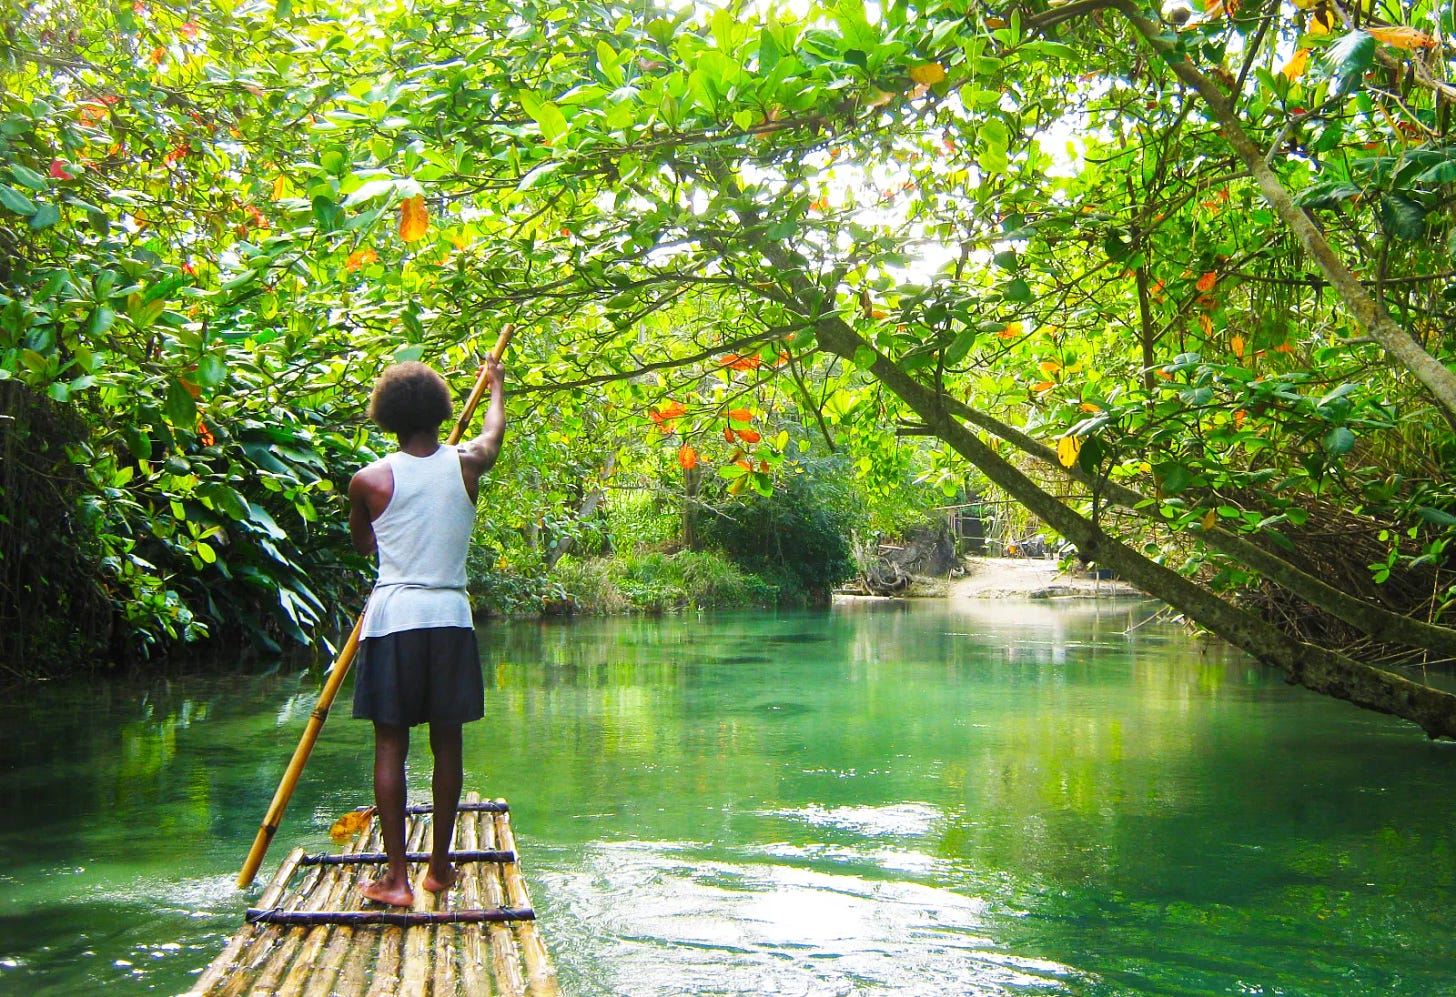 Rafting down White River in Jamaica